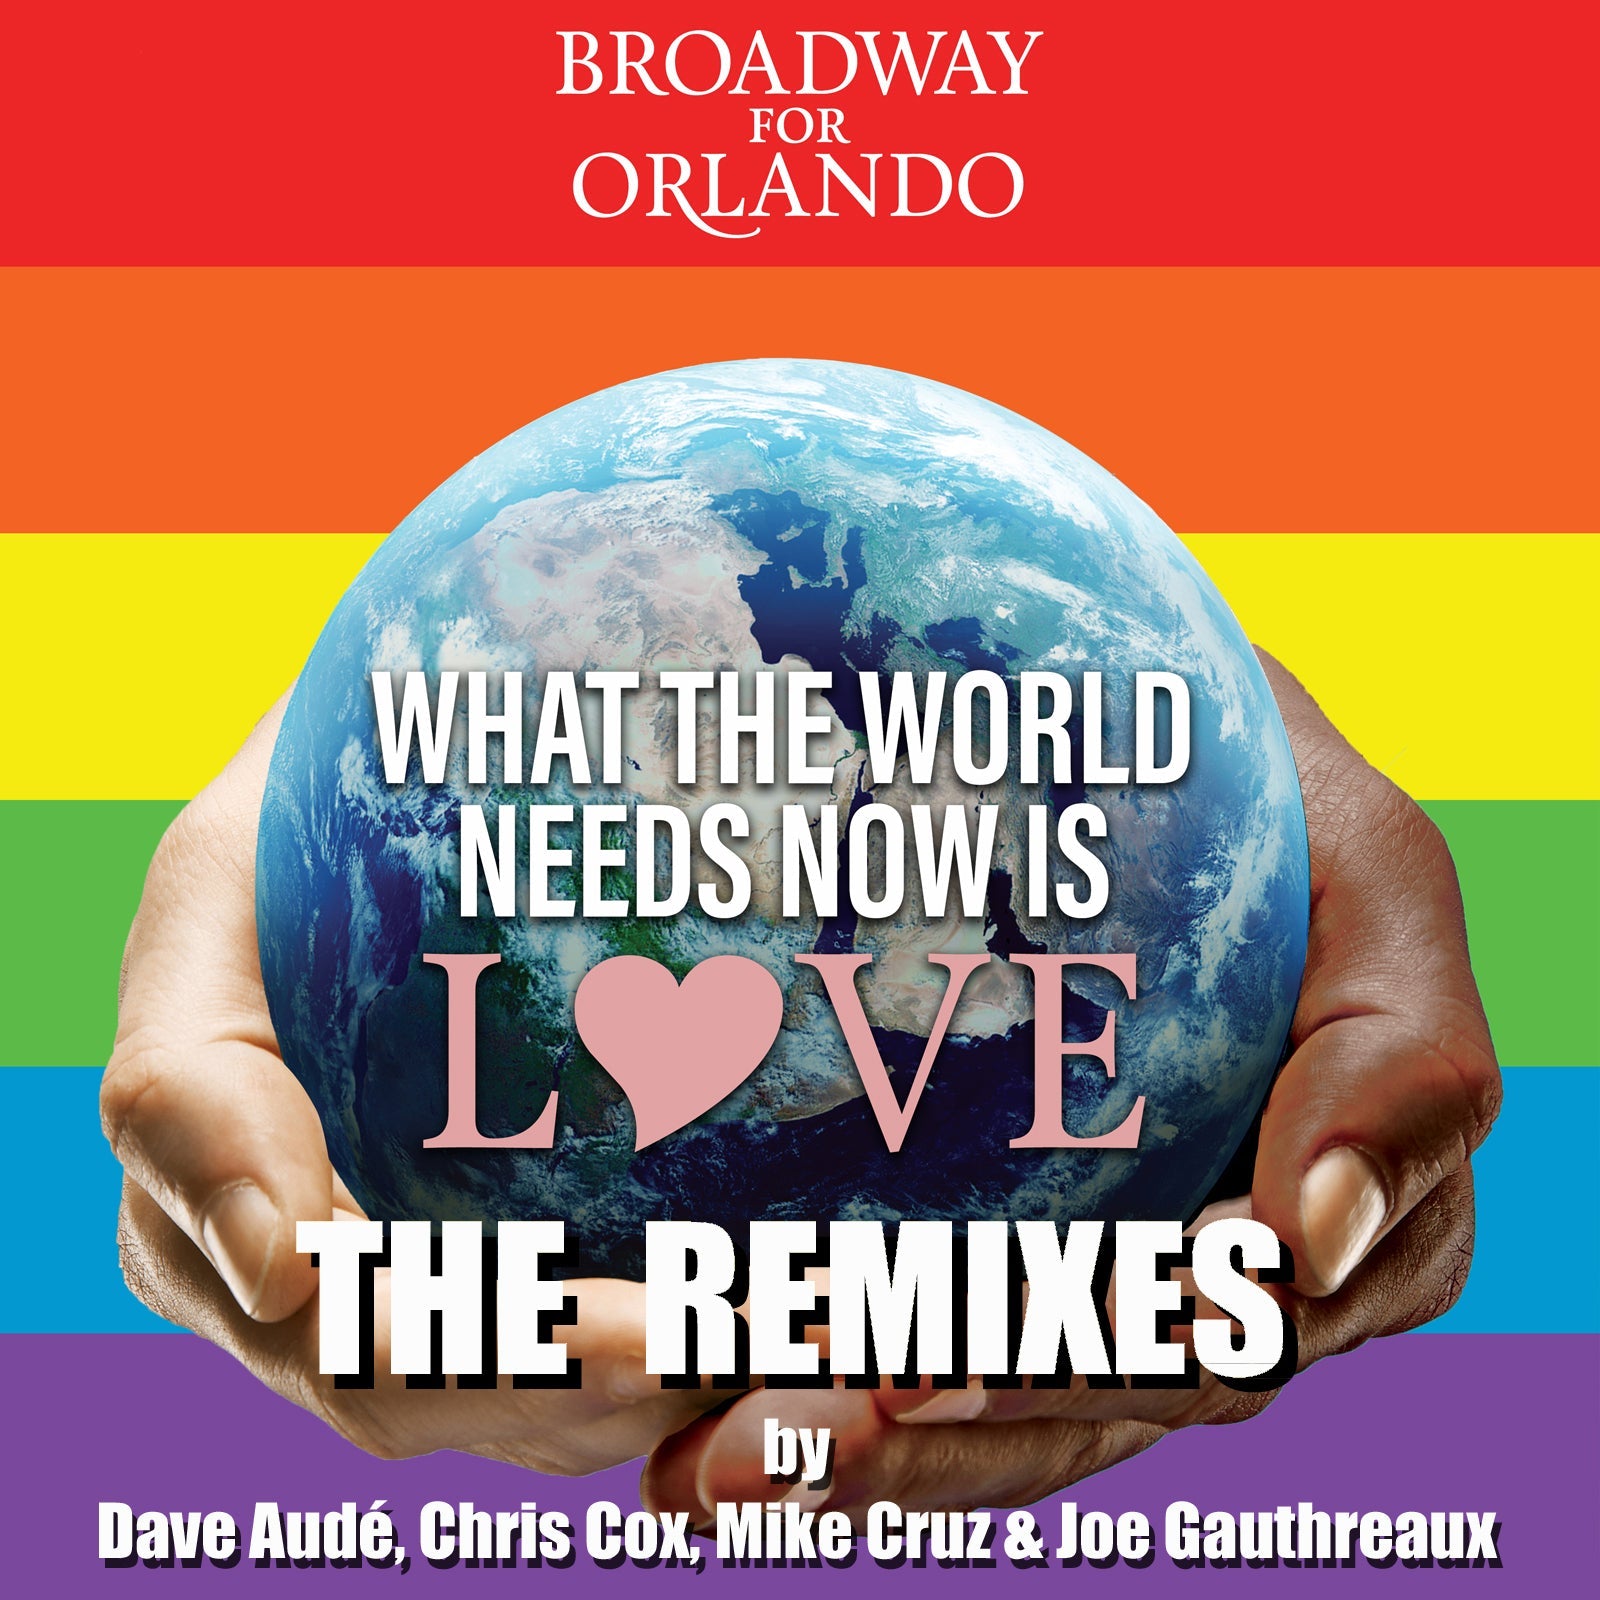 Broadway For Orlando: What the World Needs Now is Love - The Remix EP [MP3]